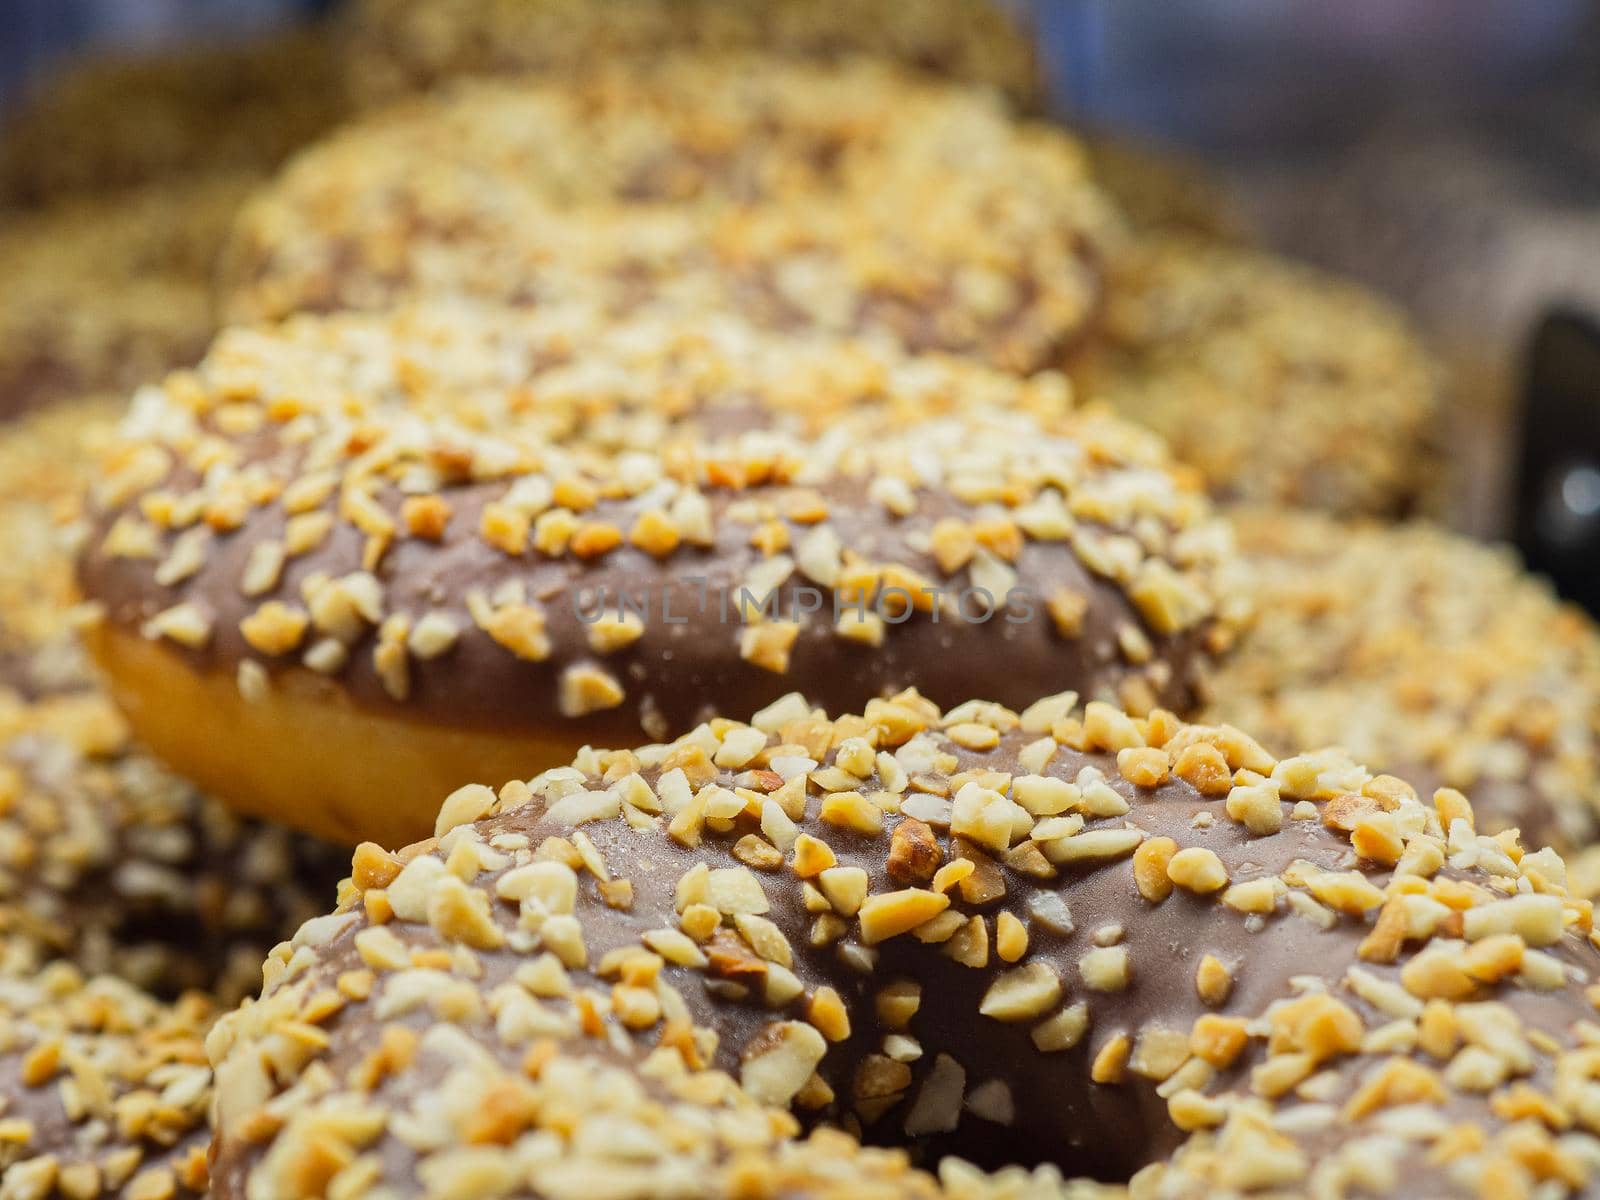 a group of delicious mouth-watering donuts with chocolate icing outside and sprinkled with chopped nuts by Alexander_V